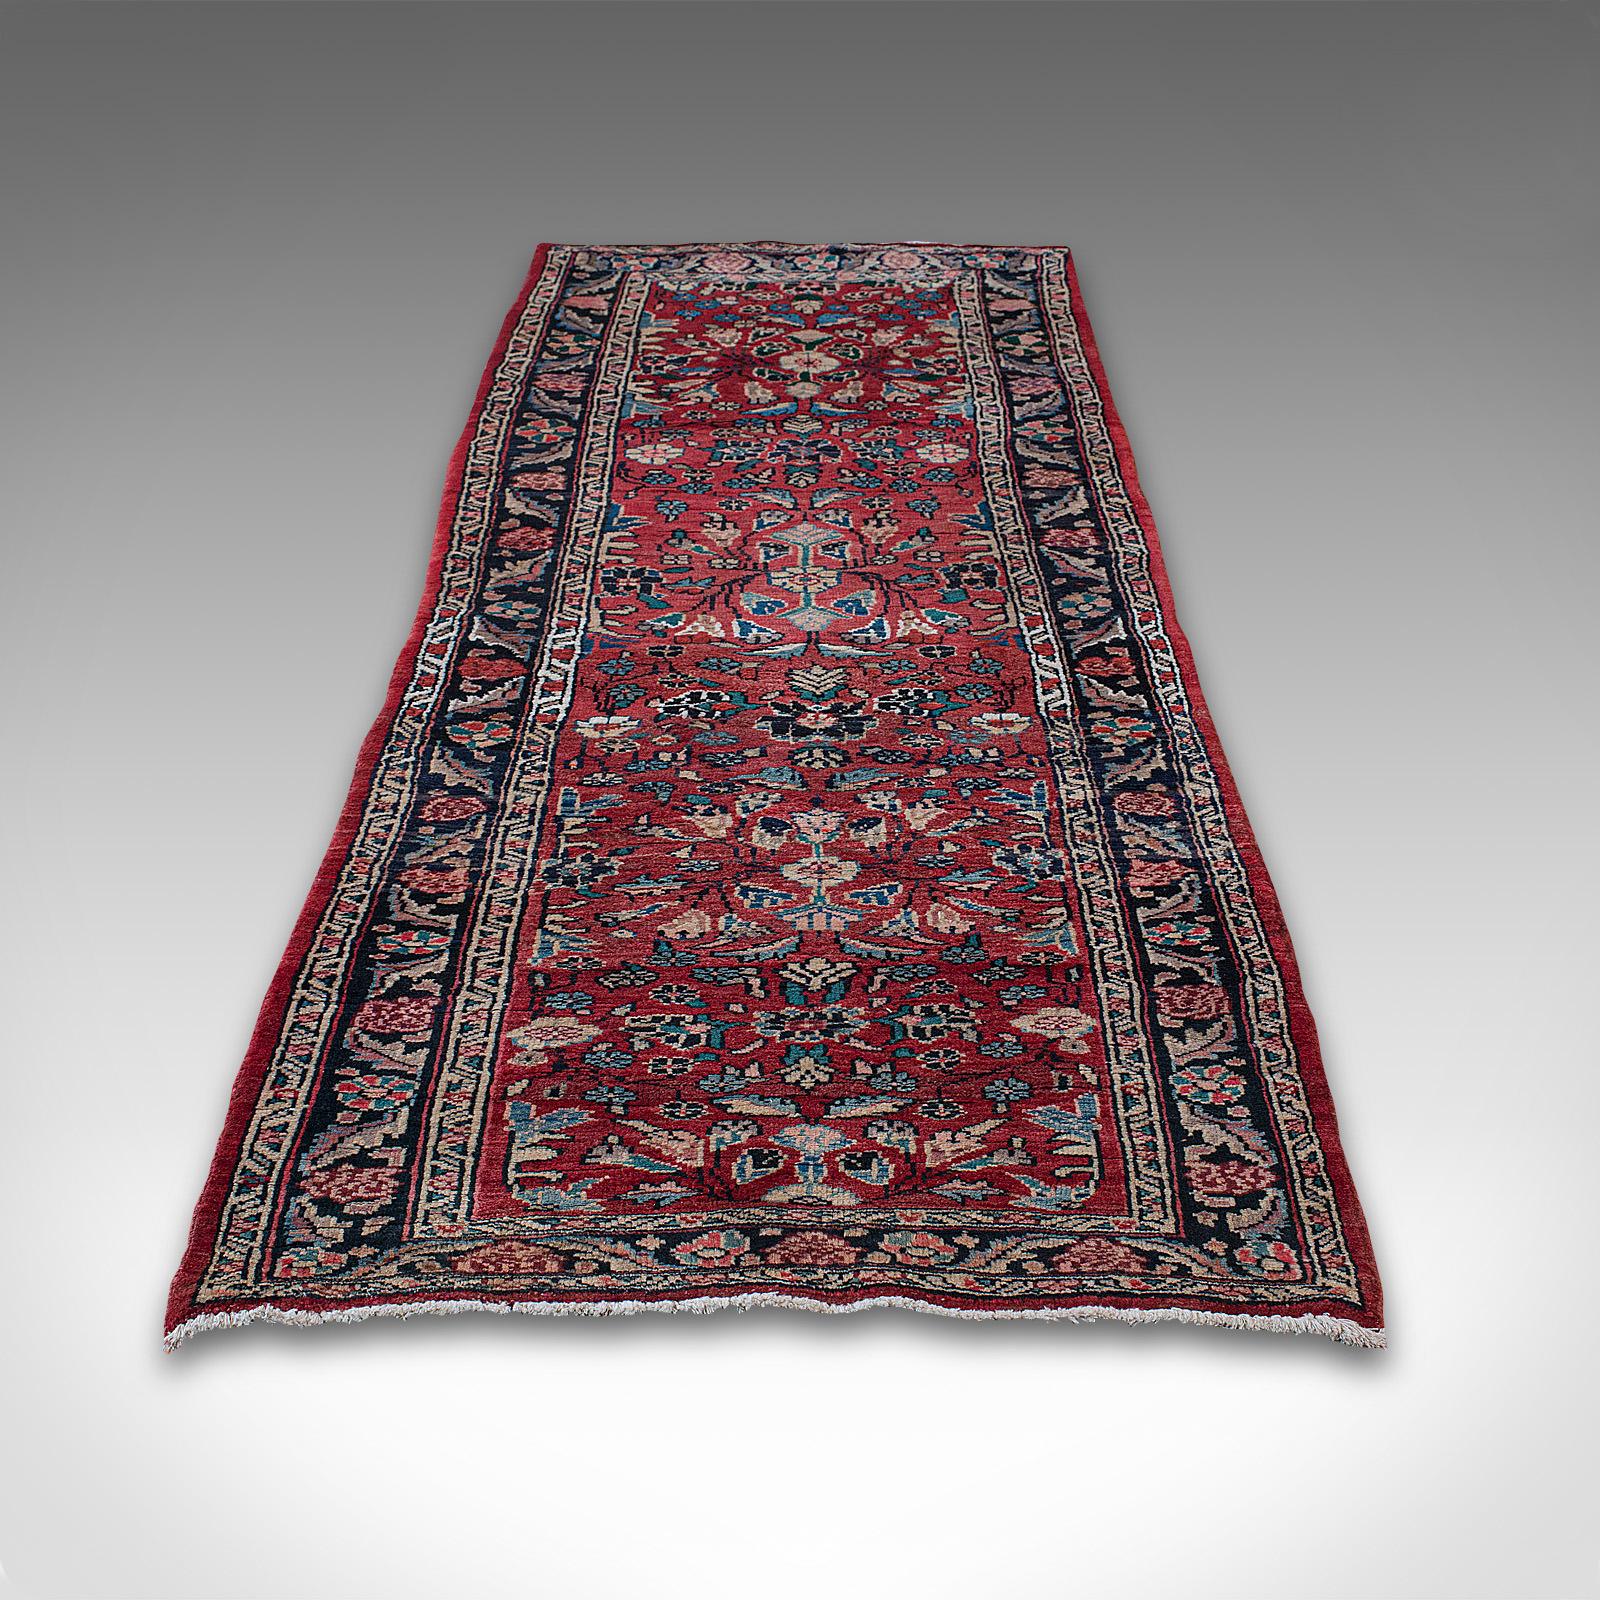 This is a long, vintage Hamadan runner. A Persian, woollen hallway rug or carpet, dating to the mid-20th century, circa 1950.

Dashing Kenareh sized runner at 87cm (34.25